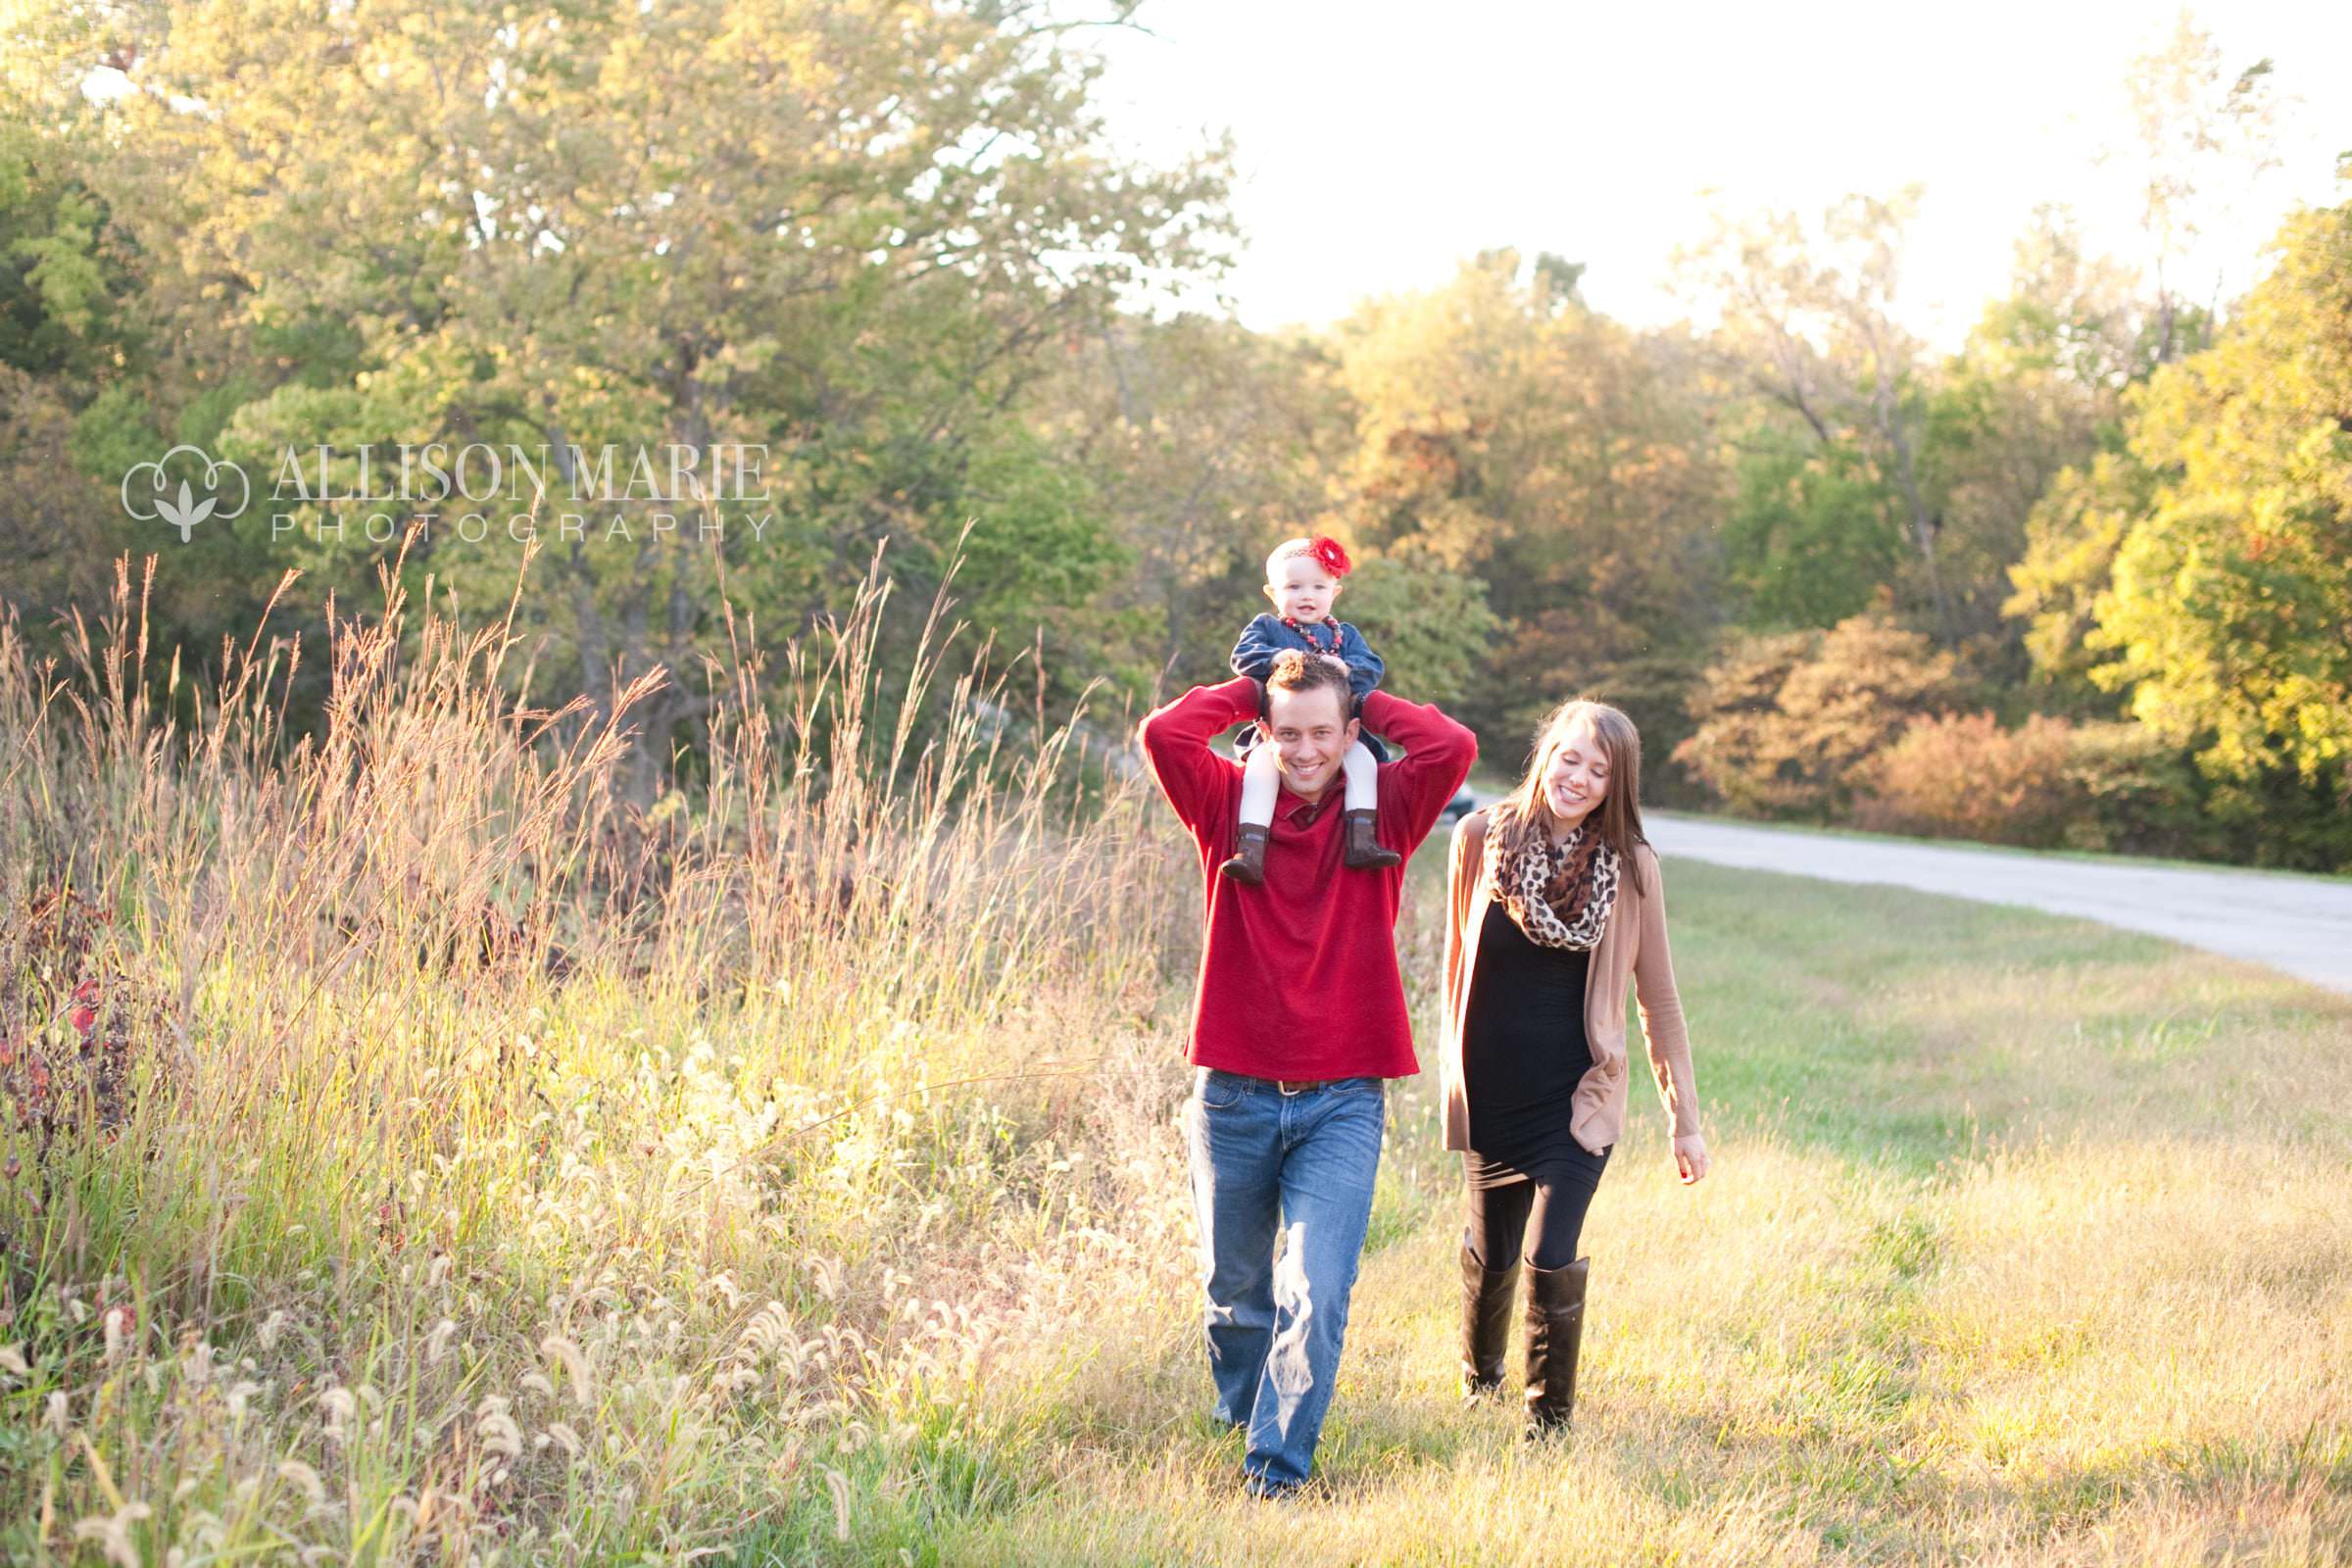 Favorite Family Images 2014, Allison Marie Photography14